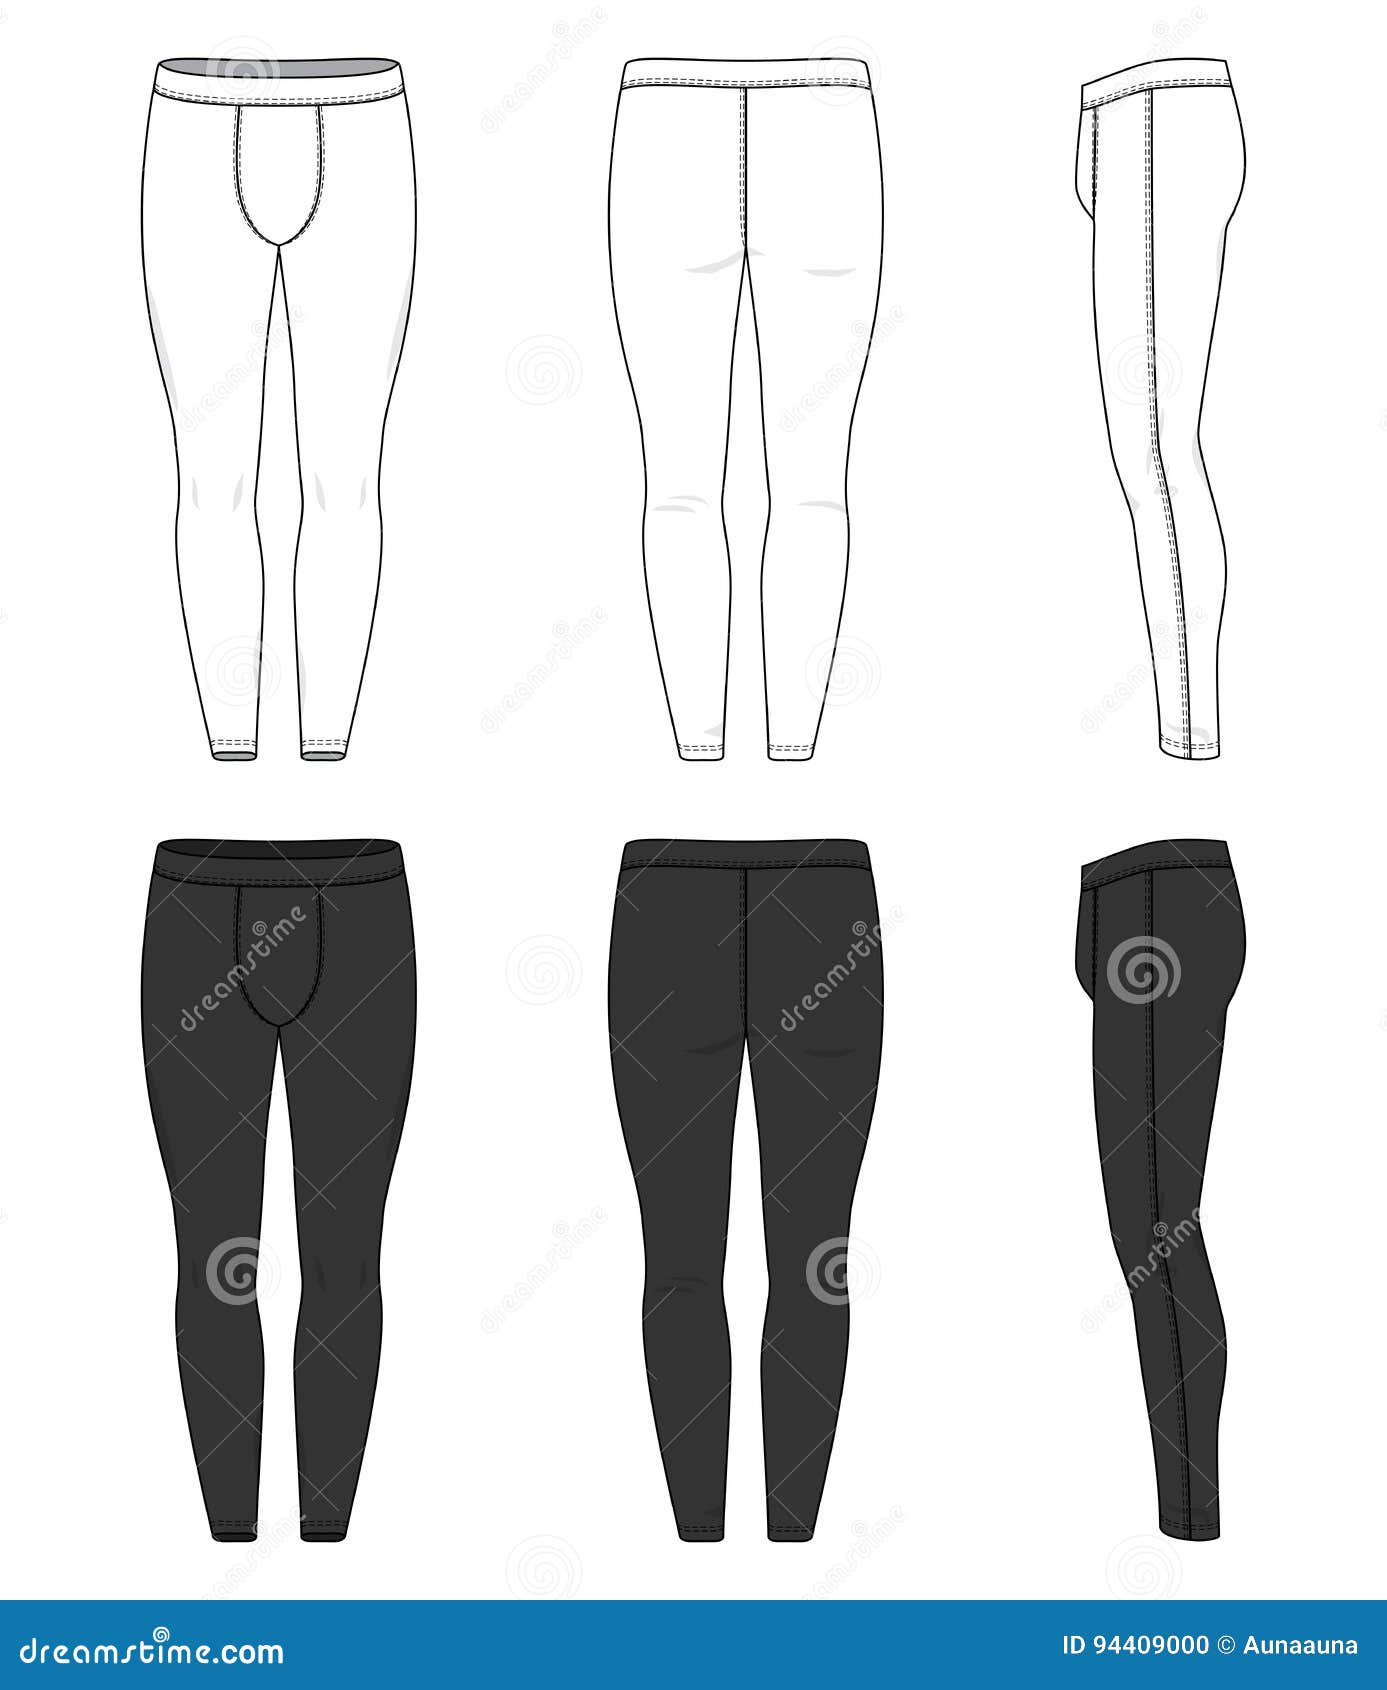 Tights Cartoons, Illustrations & Vector Stock Images - 4524 Pictures to ...